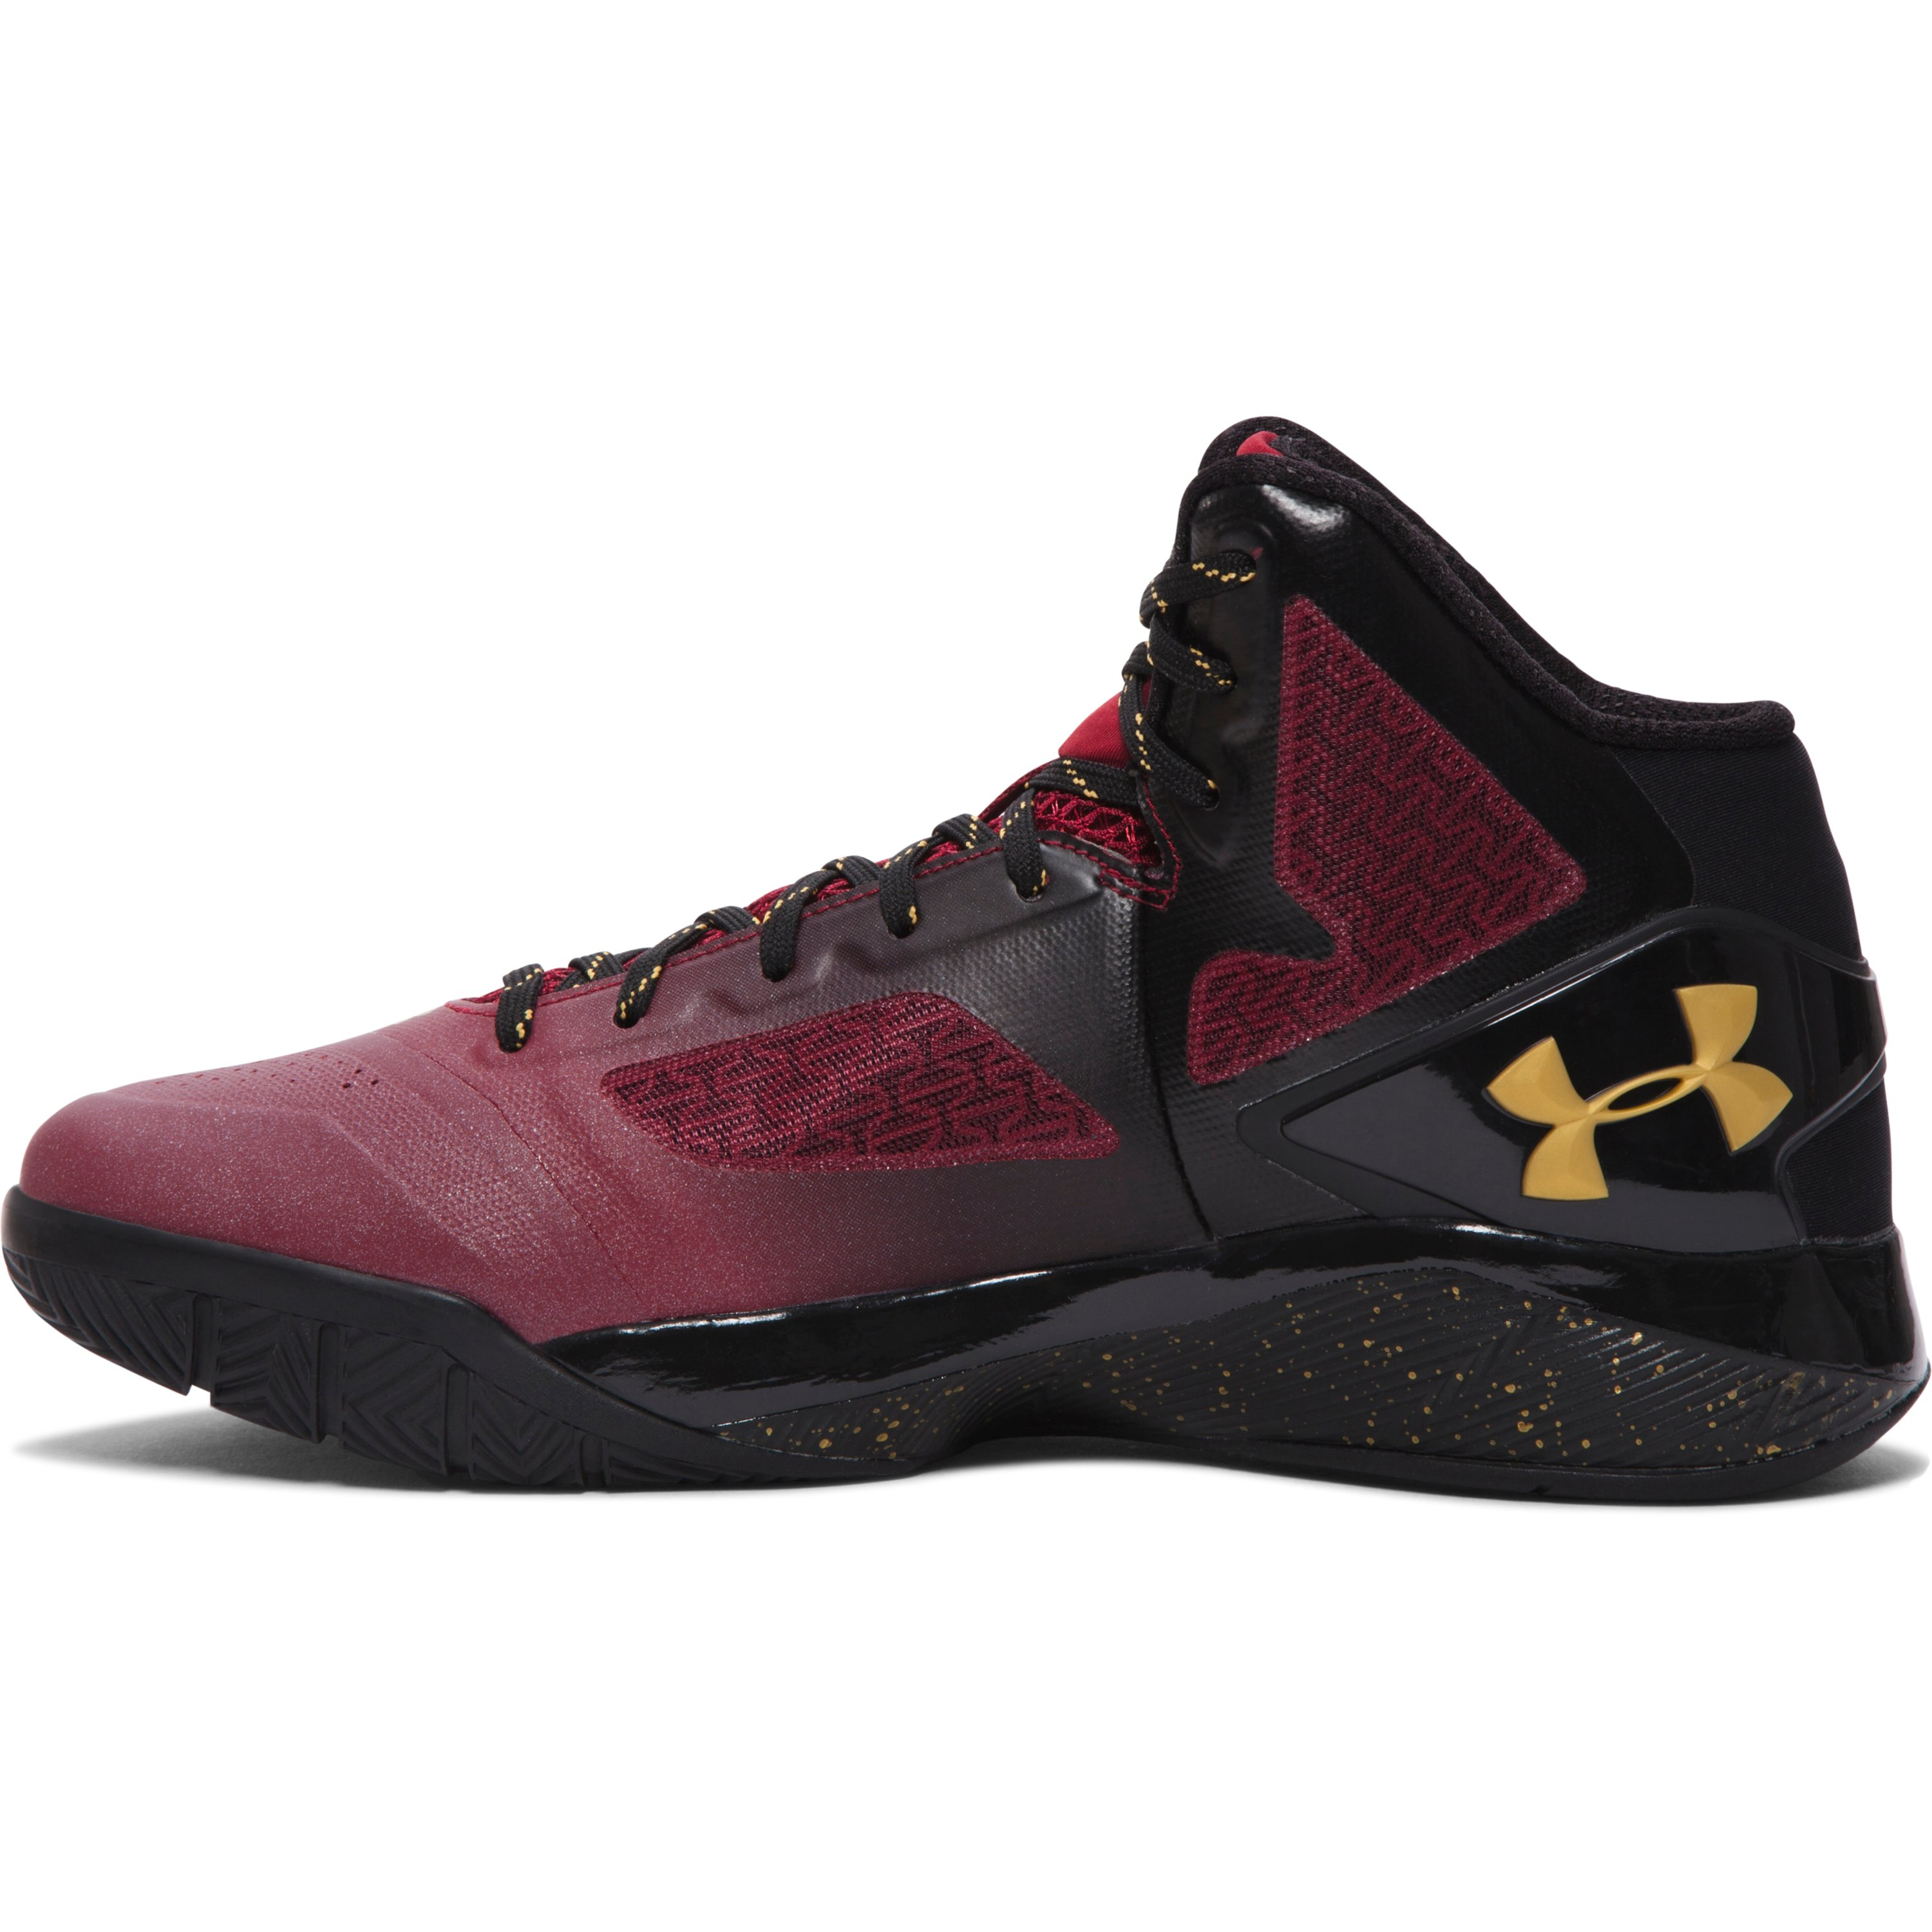 Men Under Armour UA ClutchFit Drive Red Basketball Shoes Sizes 1246931-600 curry 